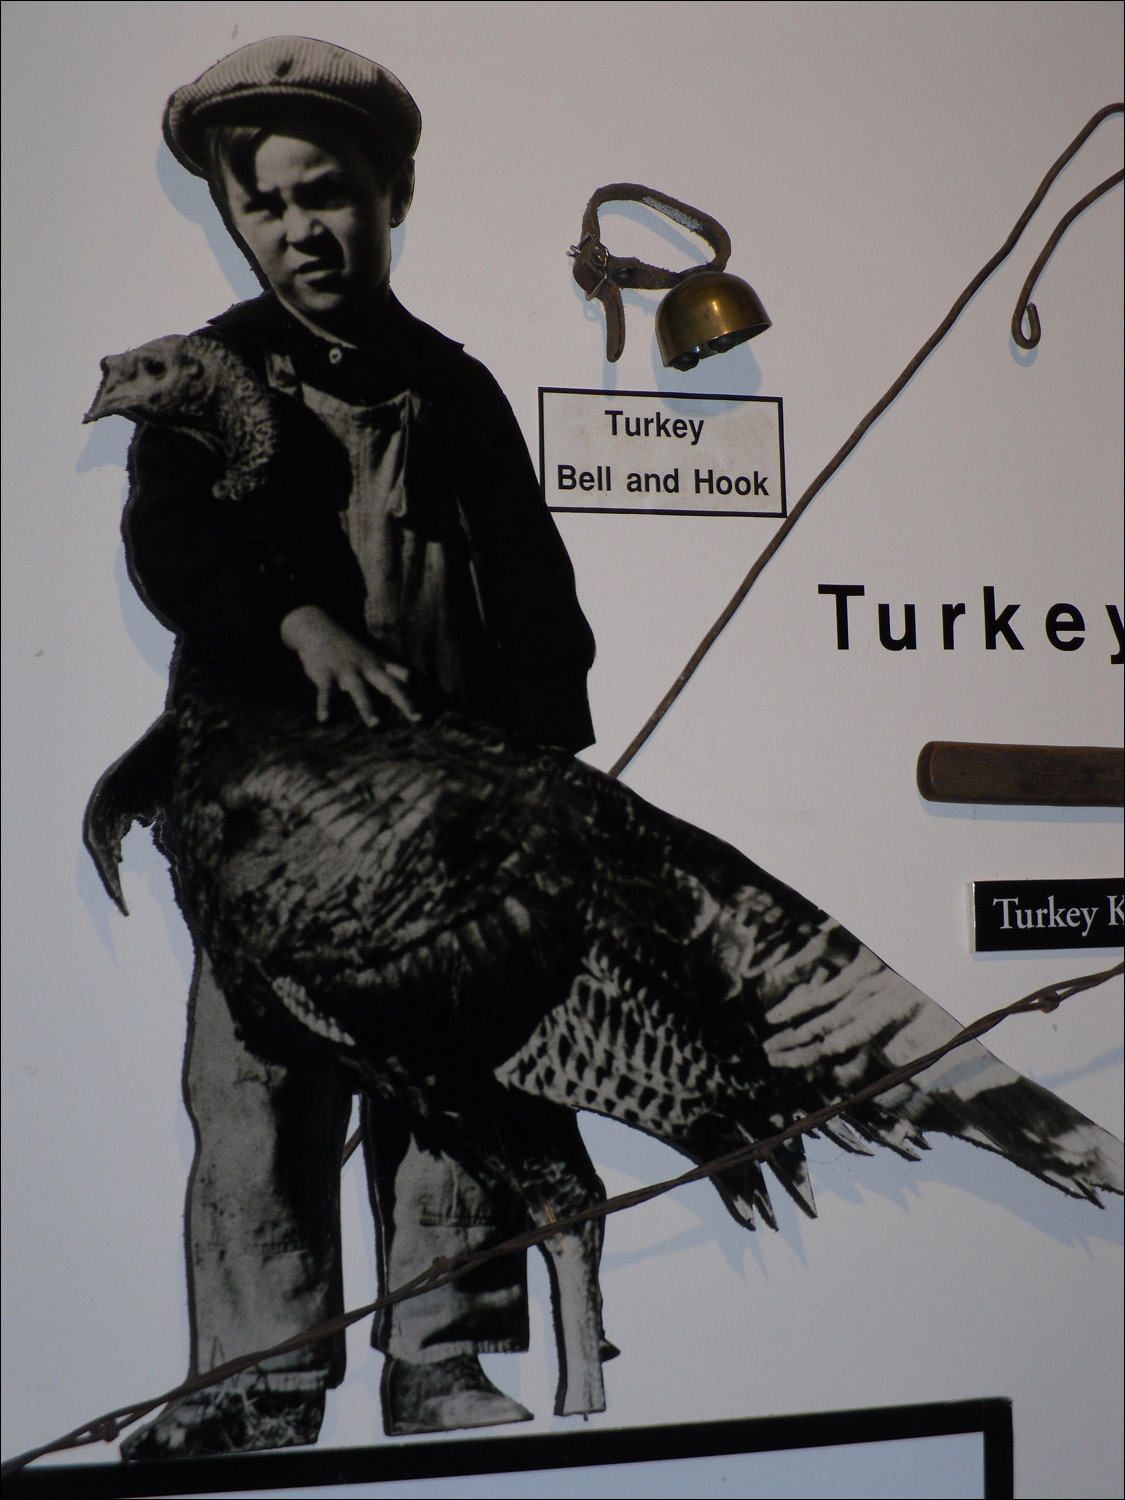 Fort Benton, MT Agriculture Museum-turkeys as crop insect control and Thanksgiving dinner